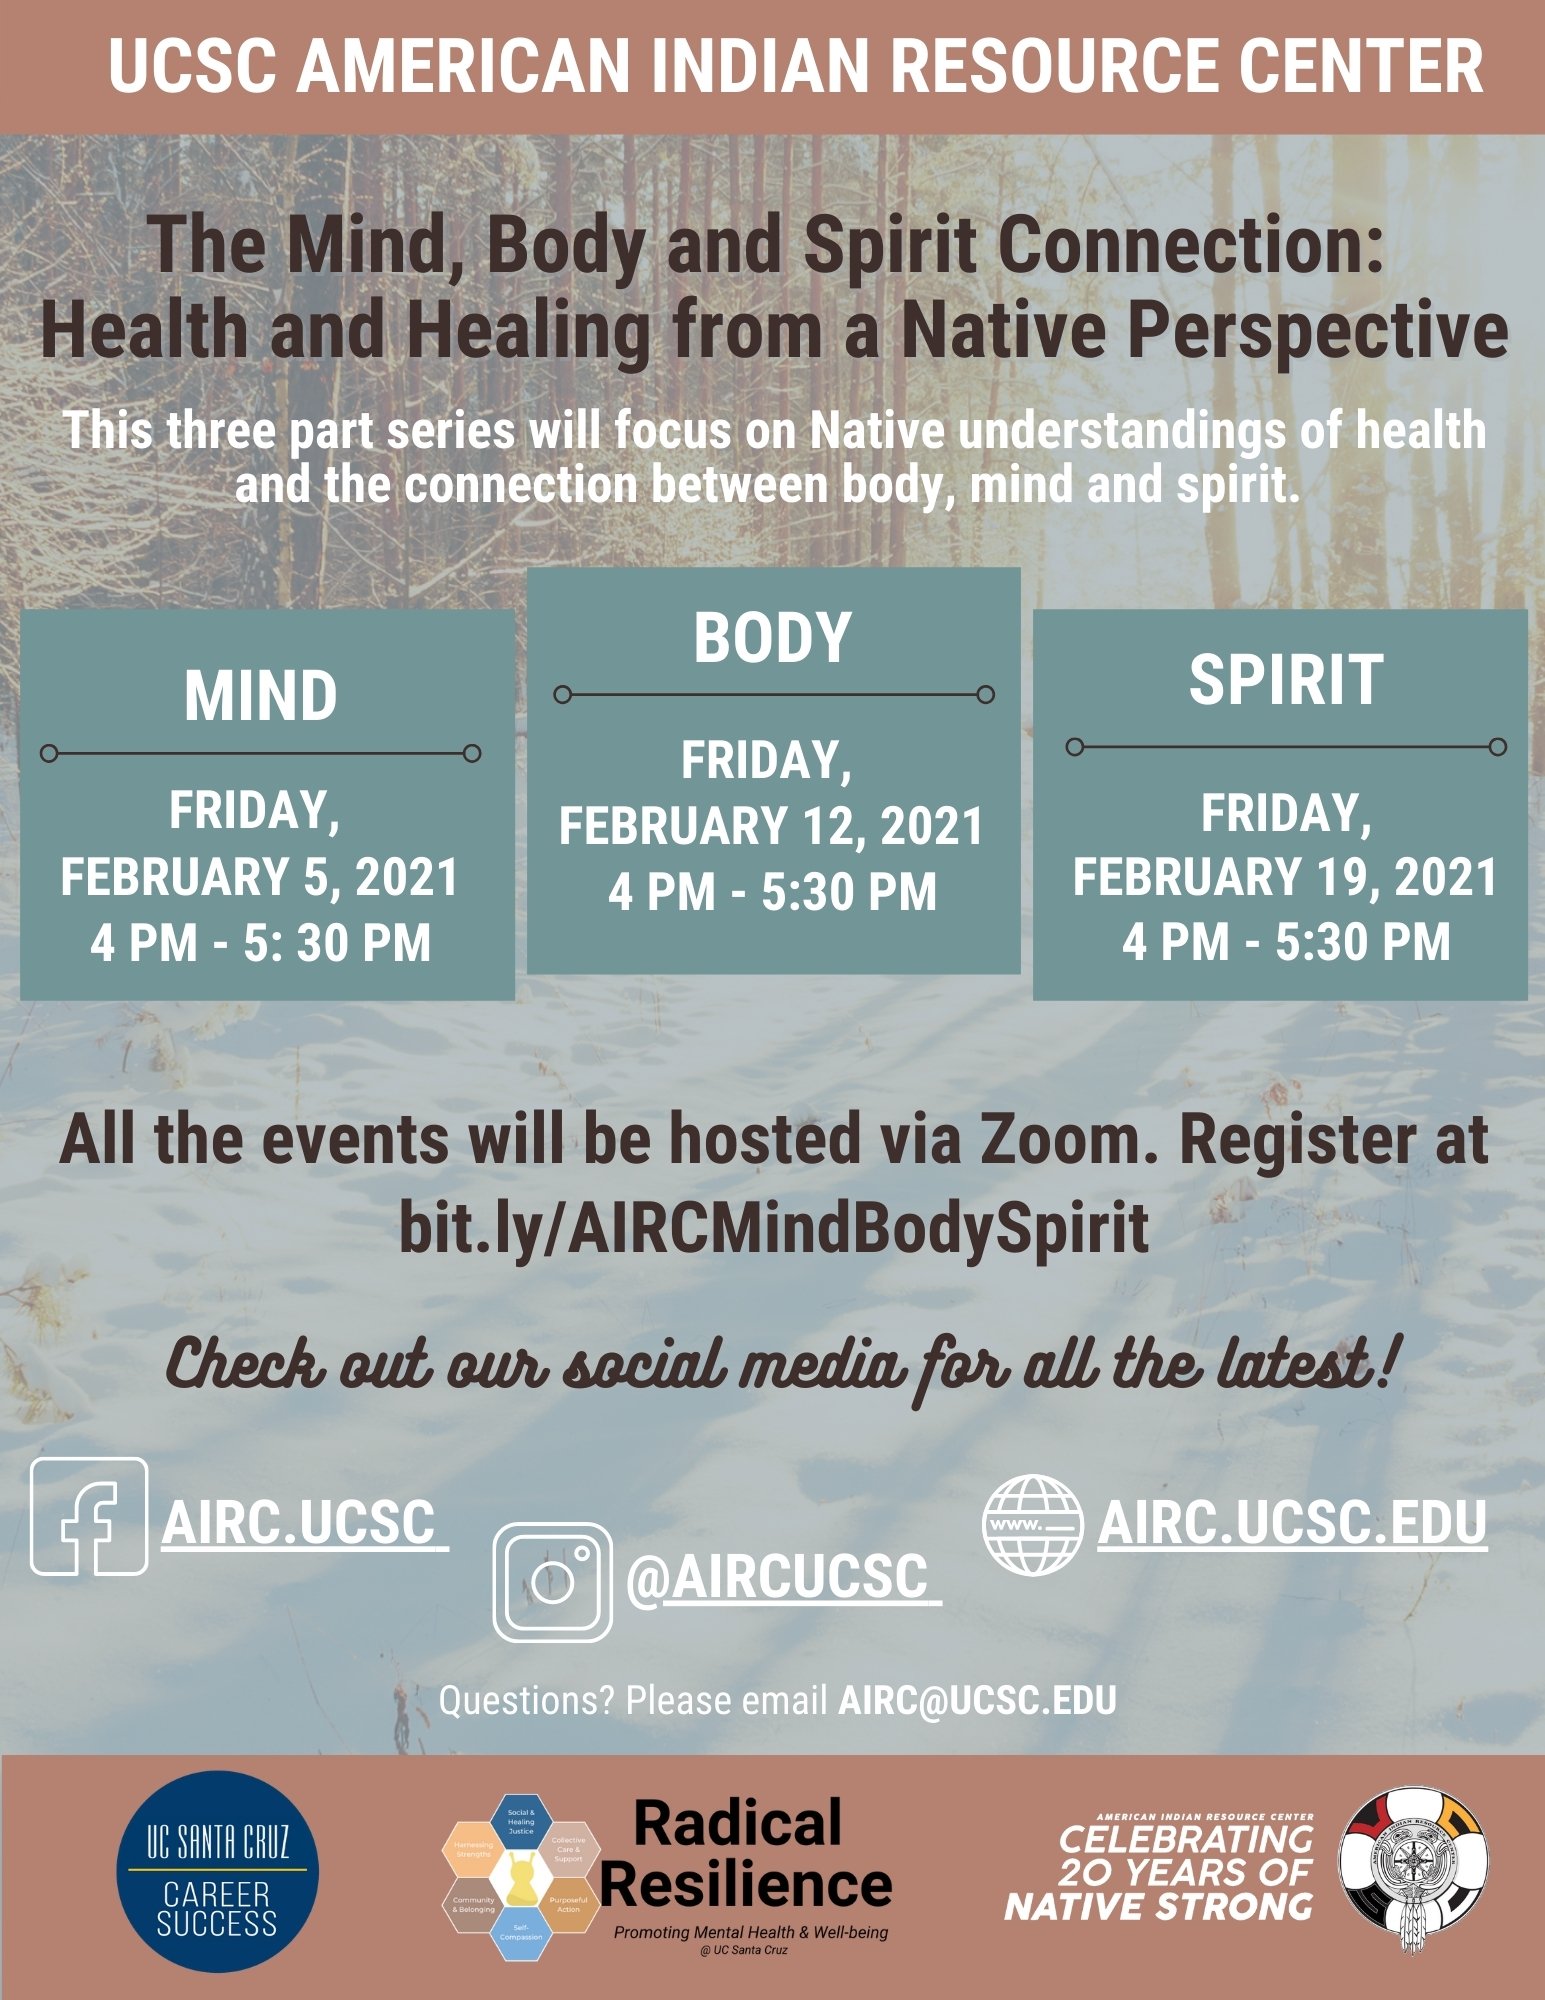 AIRC's Radical Resilience Series - The Mind, Body and Spirit Connection: Health and Healing from a Native Perspective. All 3 events are now available on the AIRC's YouTube channel!